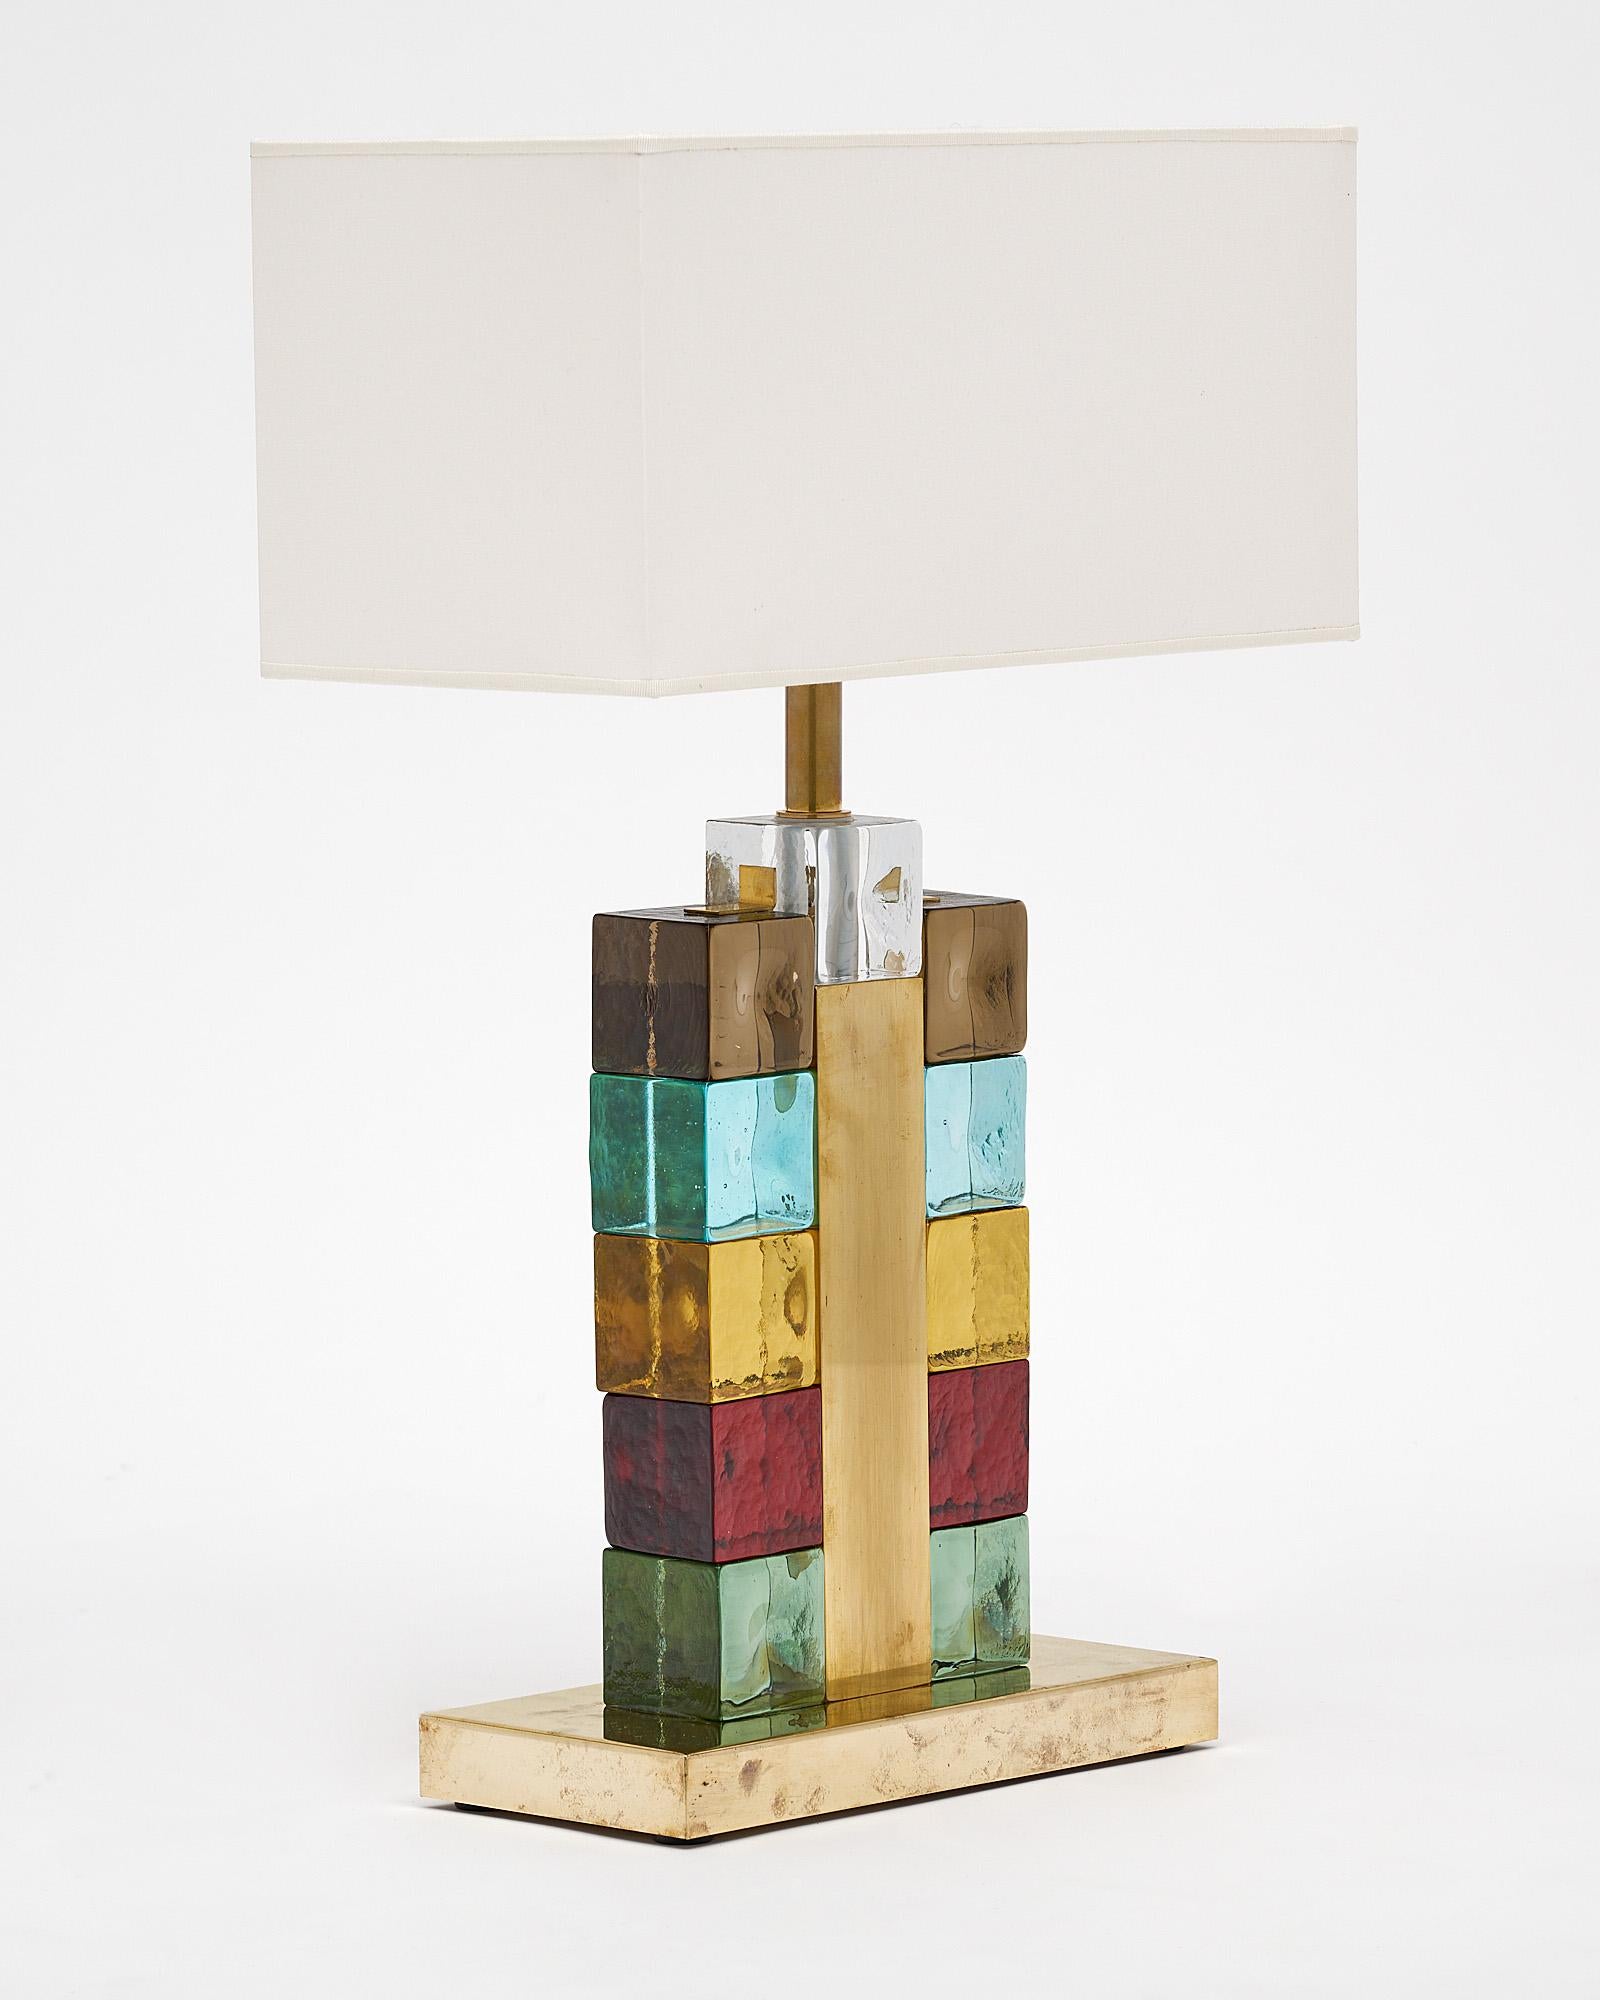 Pair of Italian Murano glass lamps with a polished brass structure. The lamps feature an array of multicolored Murano glass cubes.